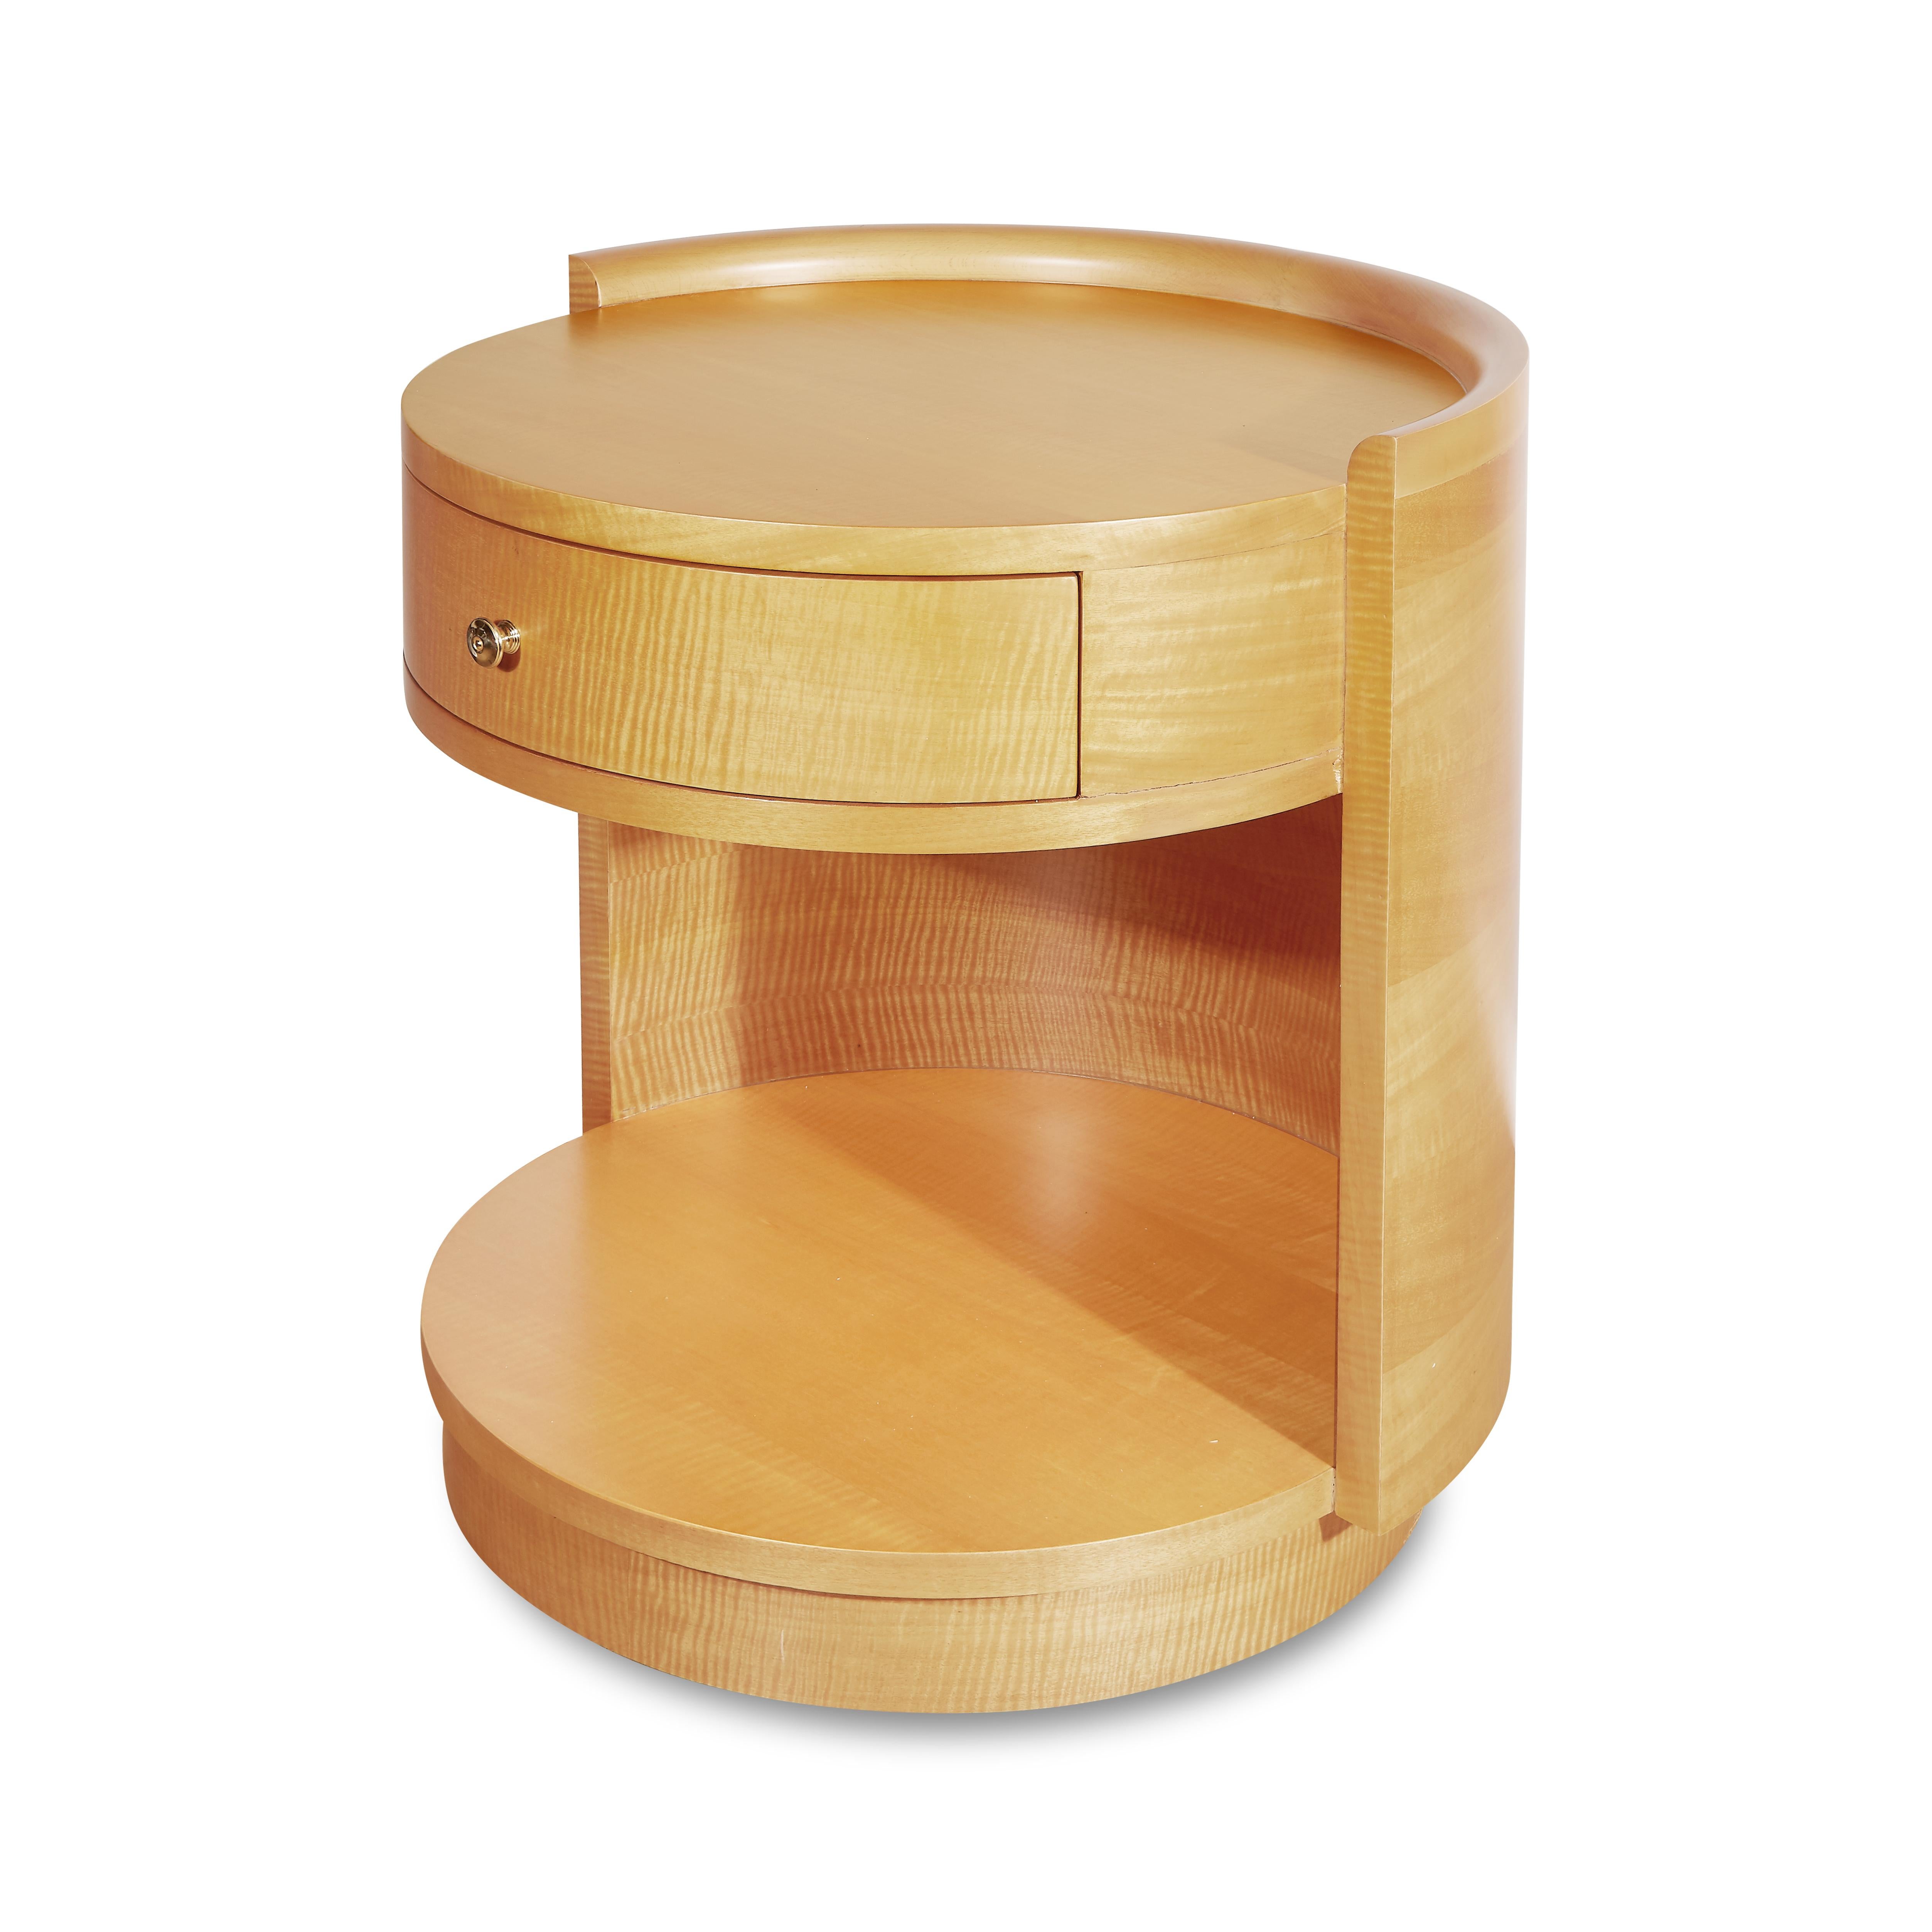 A wonderfully sleek yet capacious table, its circular form is elevated upon a plinth, with a crescent wrap around its back. Featuring a warm, subtle Birch veneer and beautifully cast brass drawer knob. Works equally well as a bedside table or as a